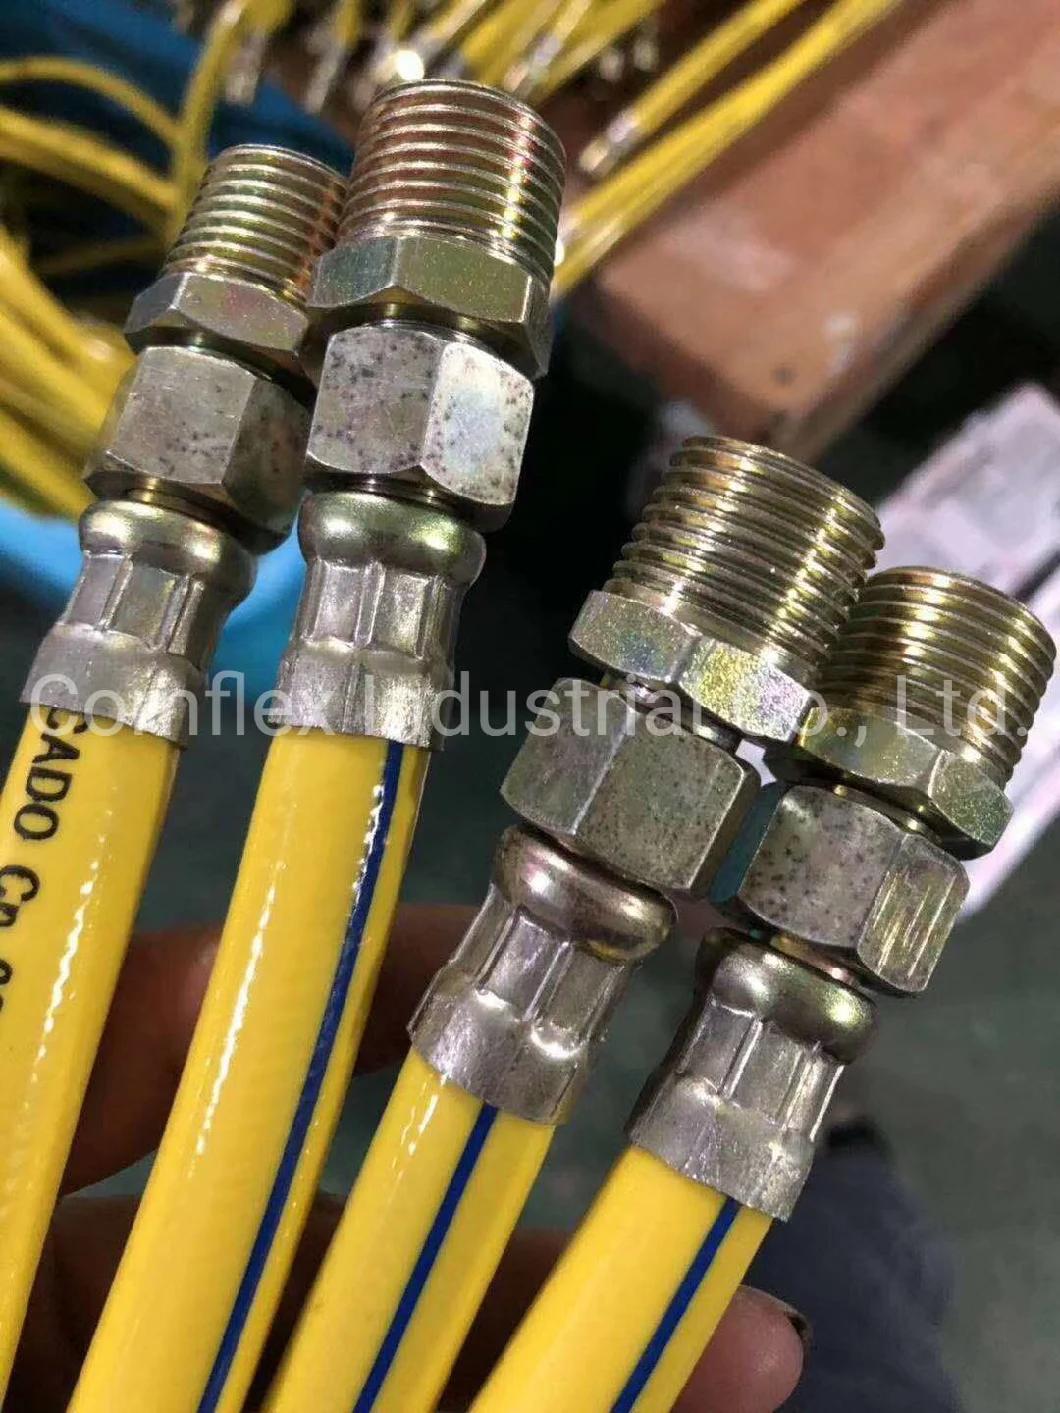 Auto Gas/Water Hose Fitting Assembly Machine, Hydraulic Hose Screw Nut Connector Assemble Equipment^